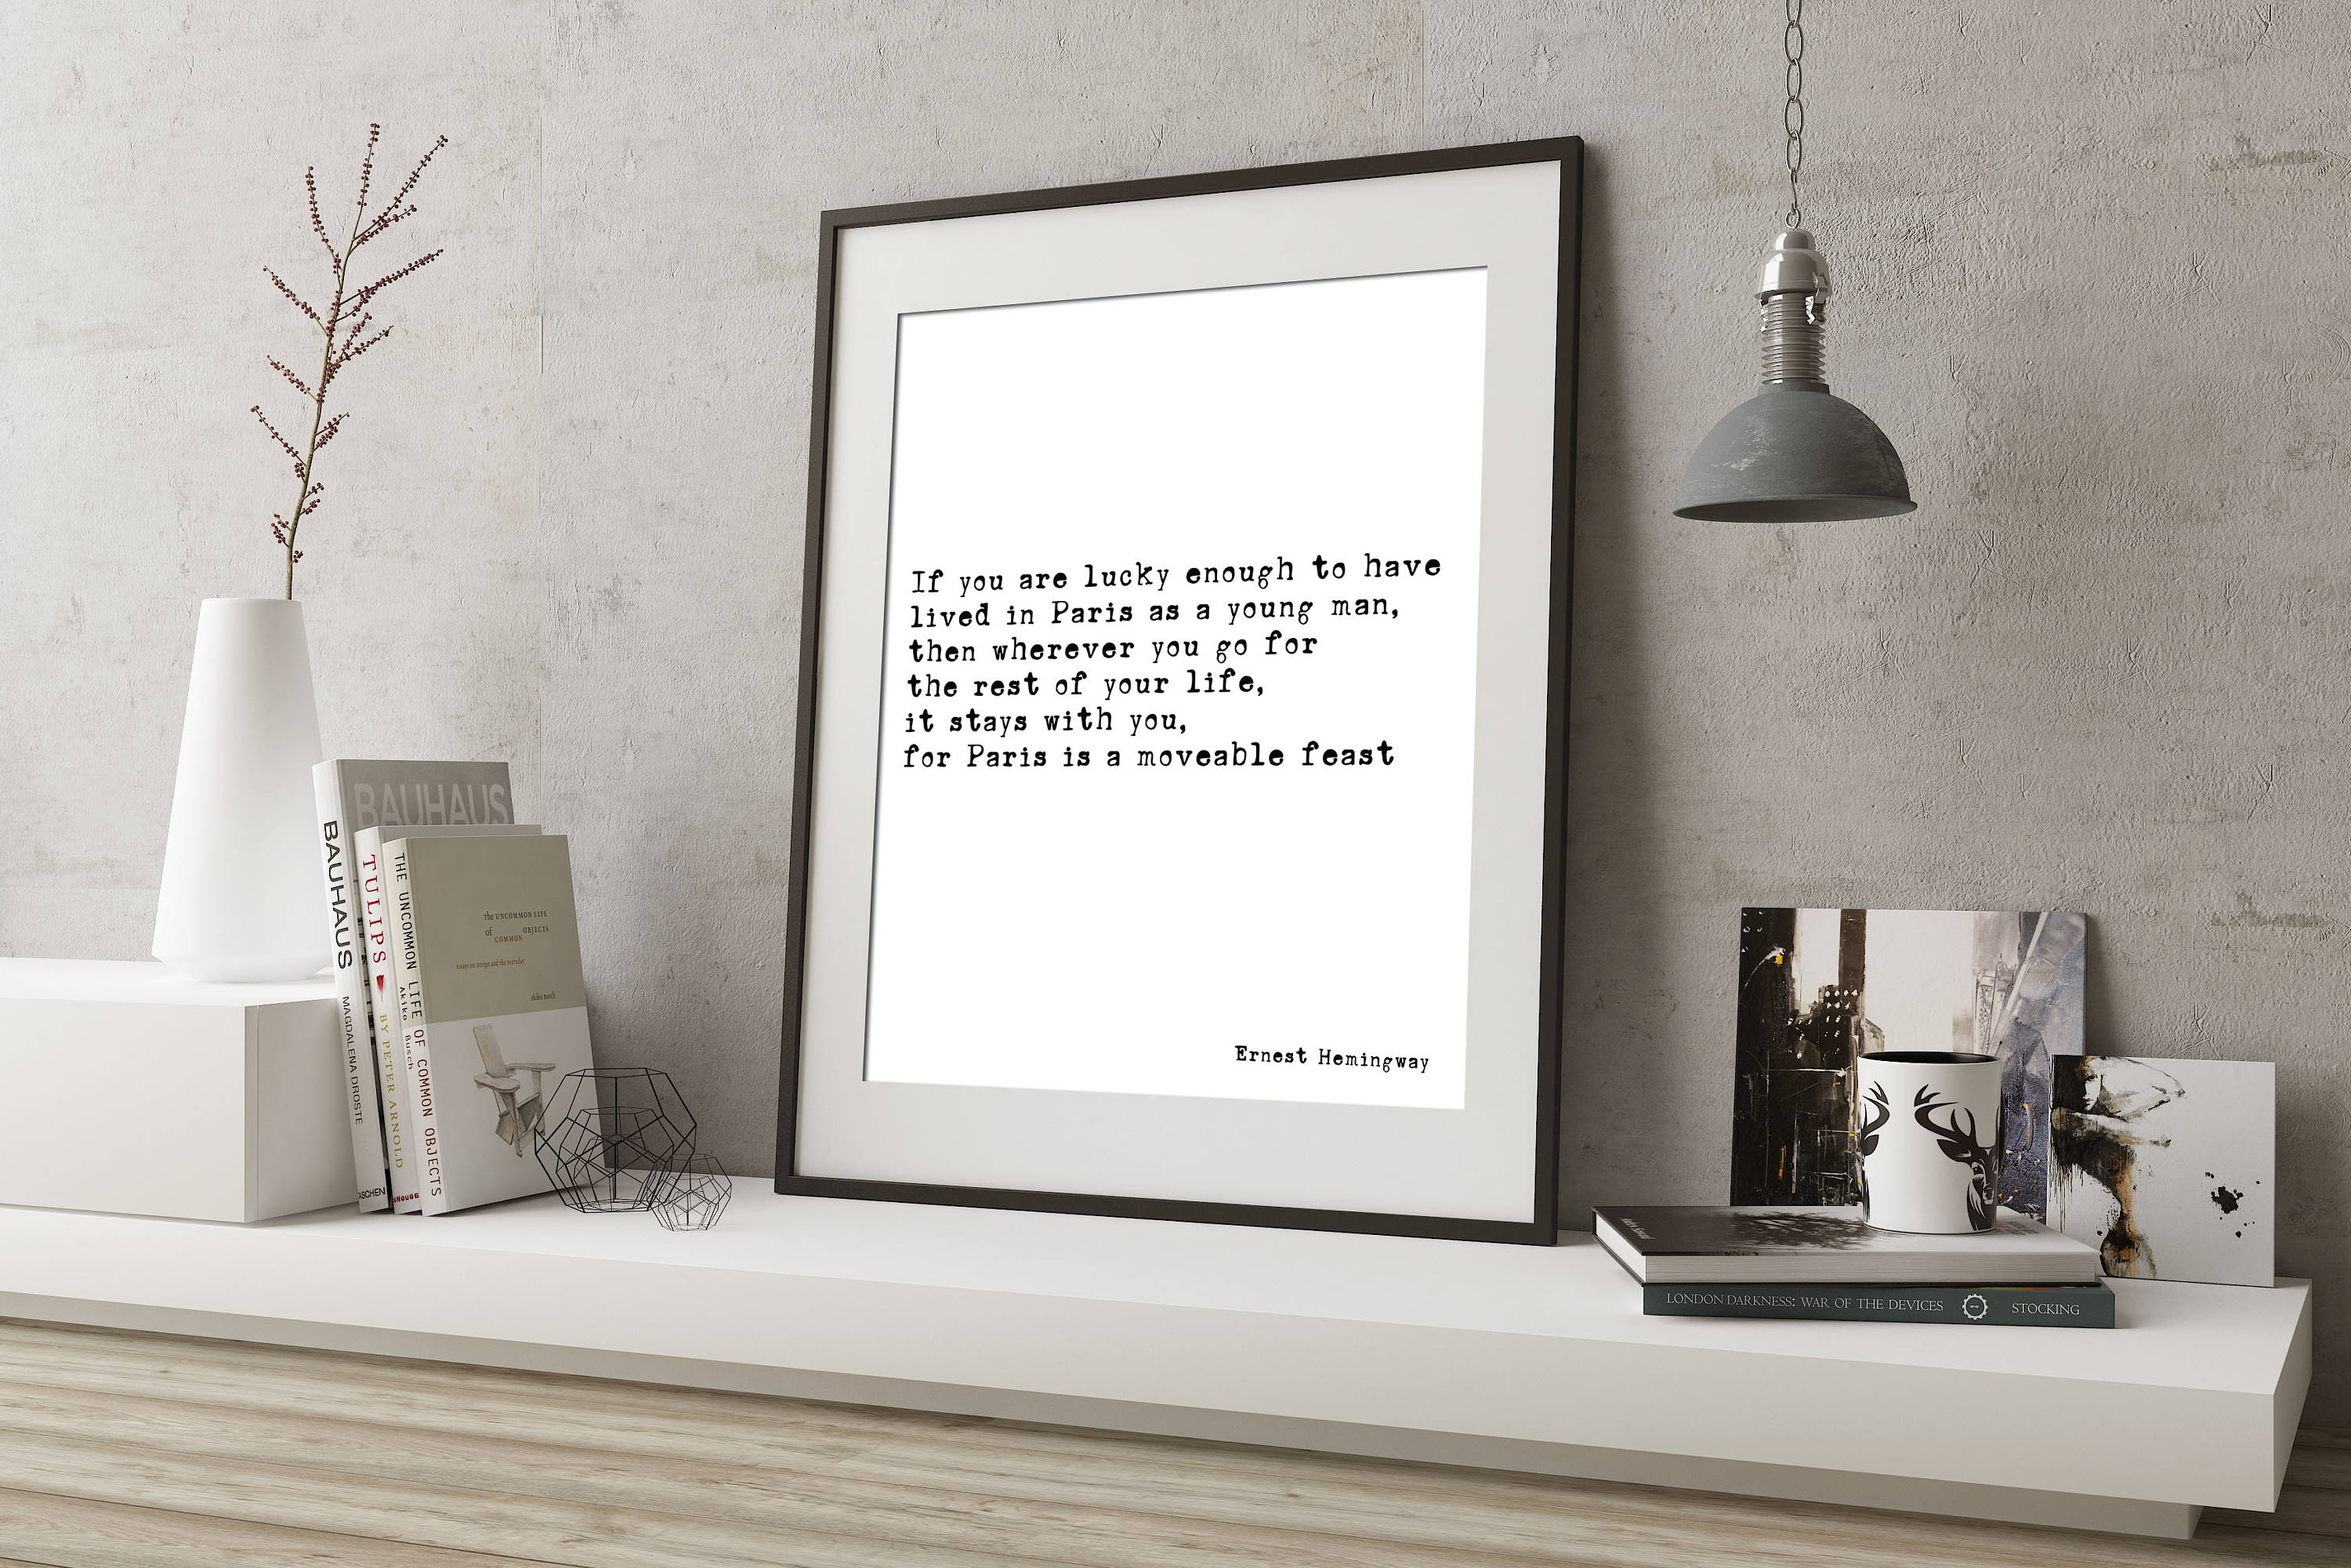 Paris Is A Moveable Feast Hemingway Quote Print, Book Quote Unframed Black & White Wall Art Prints